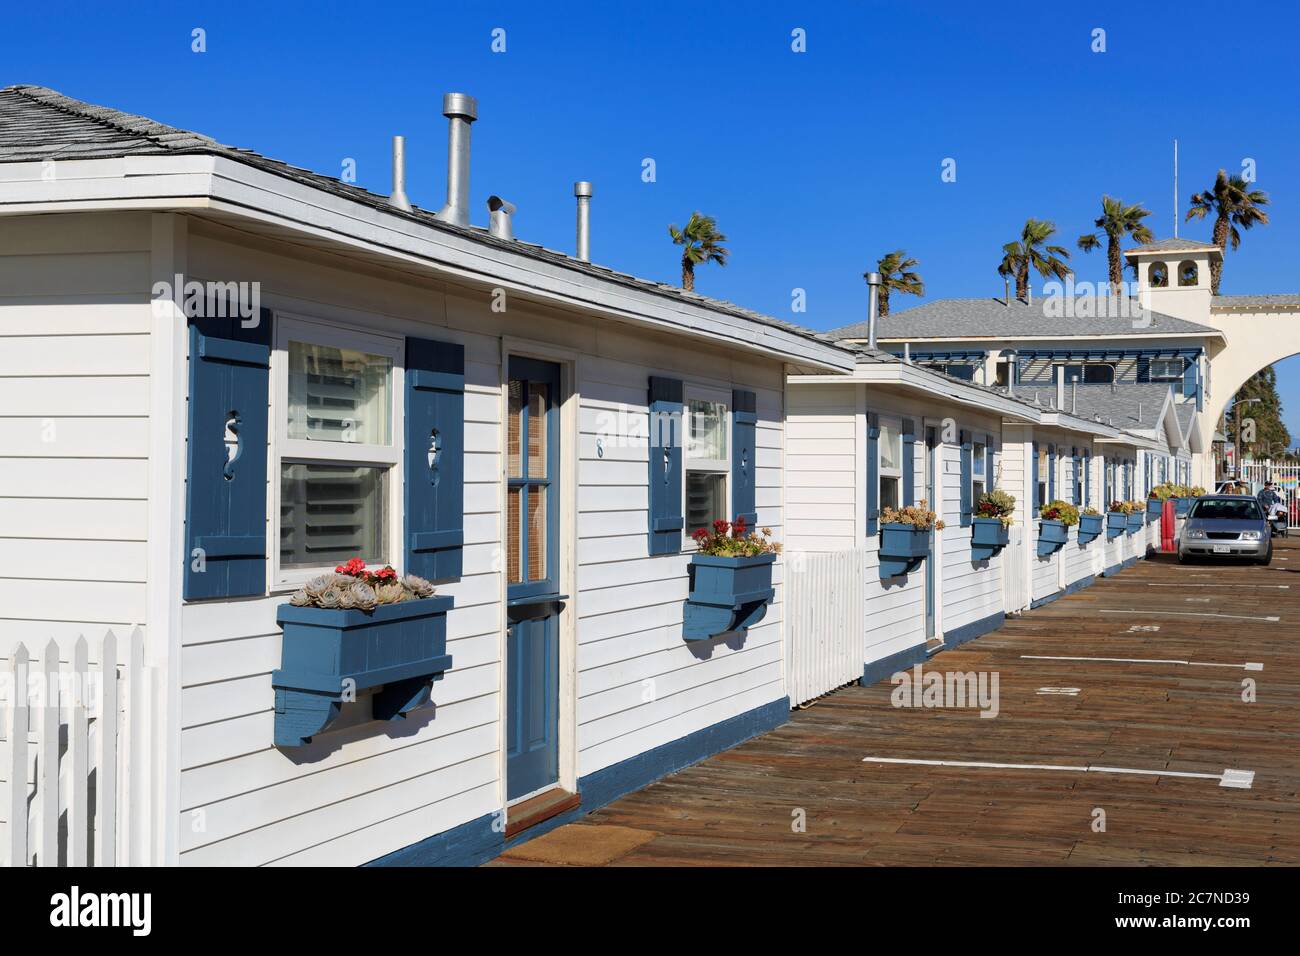 Cottages On Crystal Pier Pacific Beach San Diego California Usa 2C7ND39 